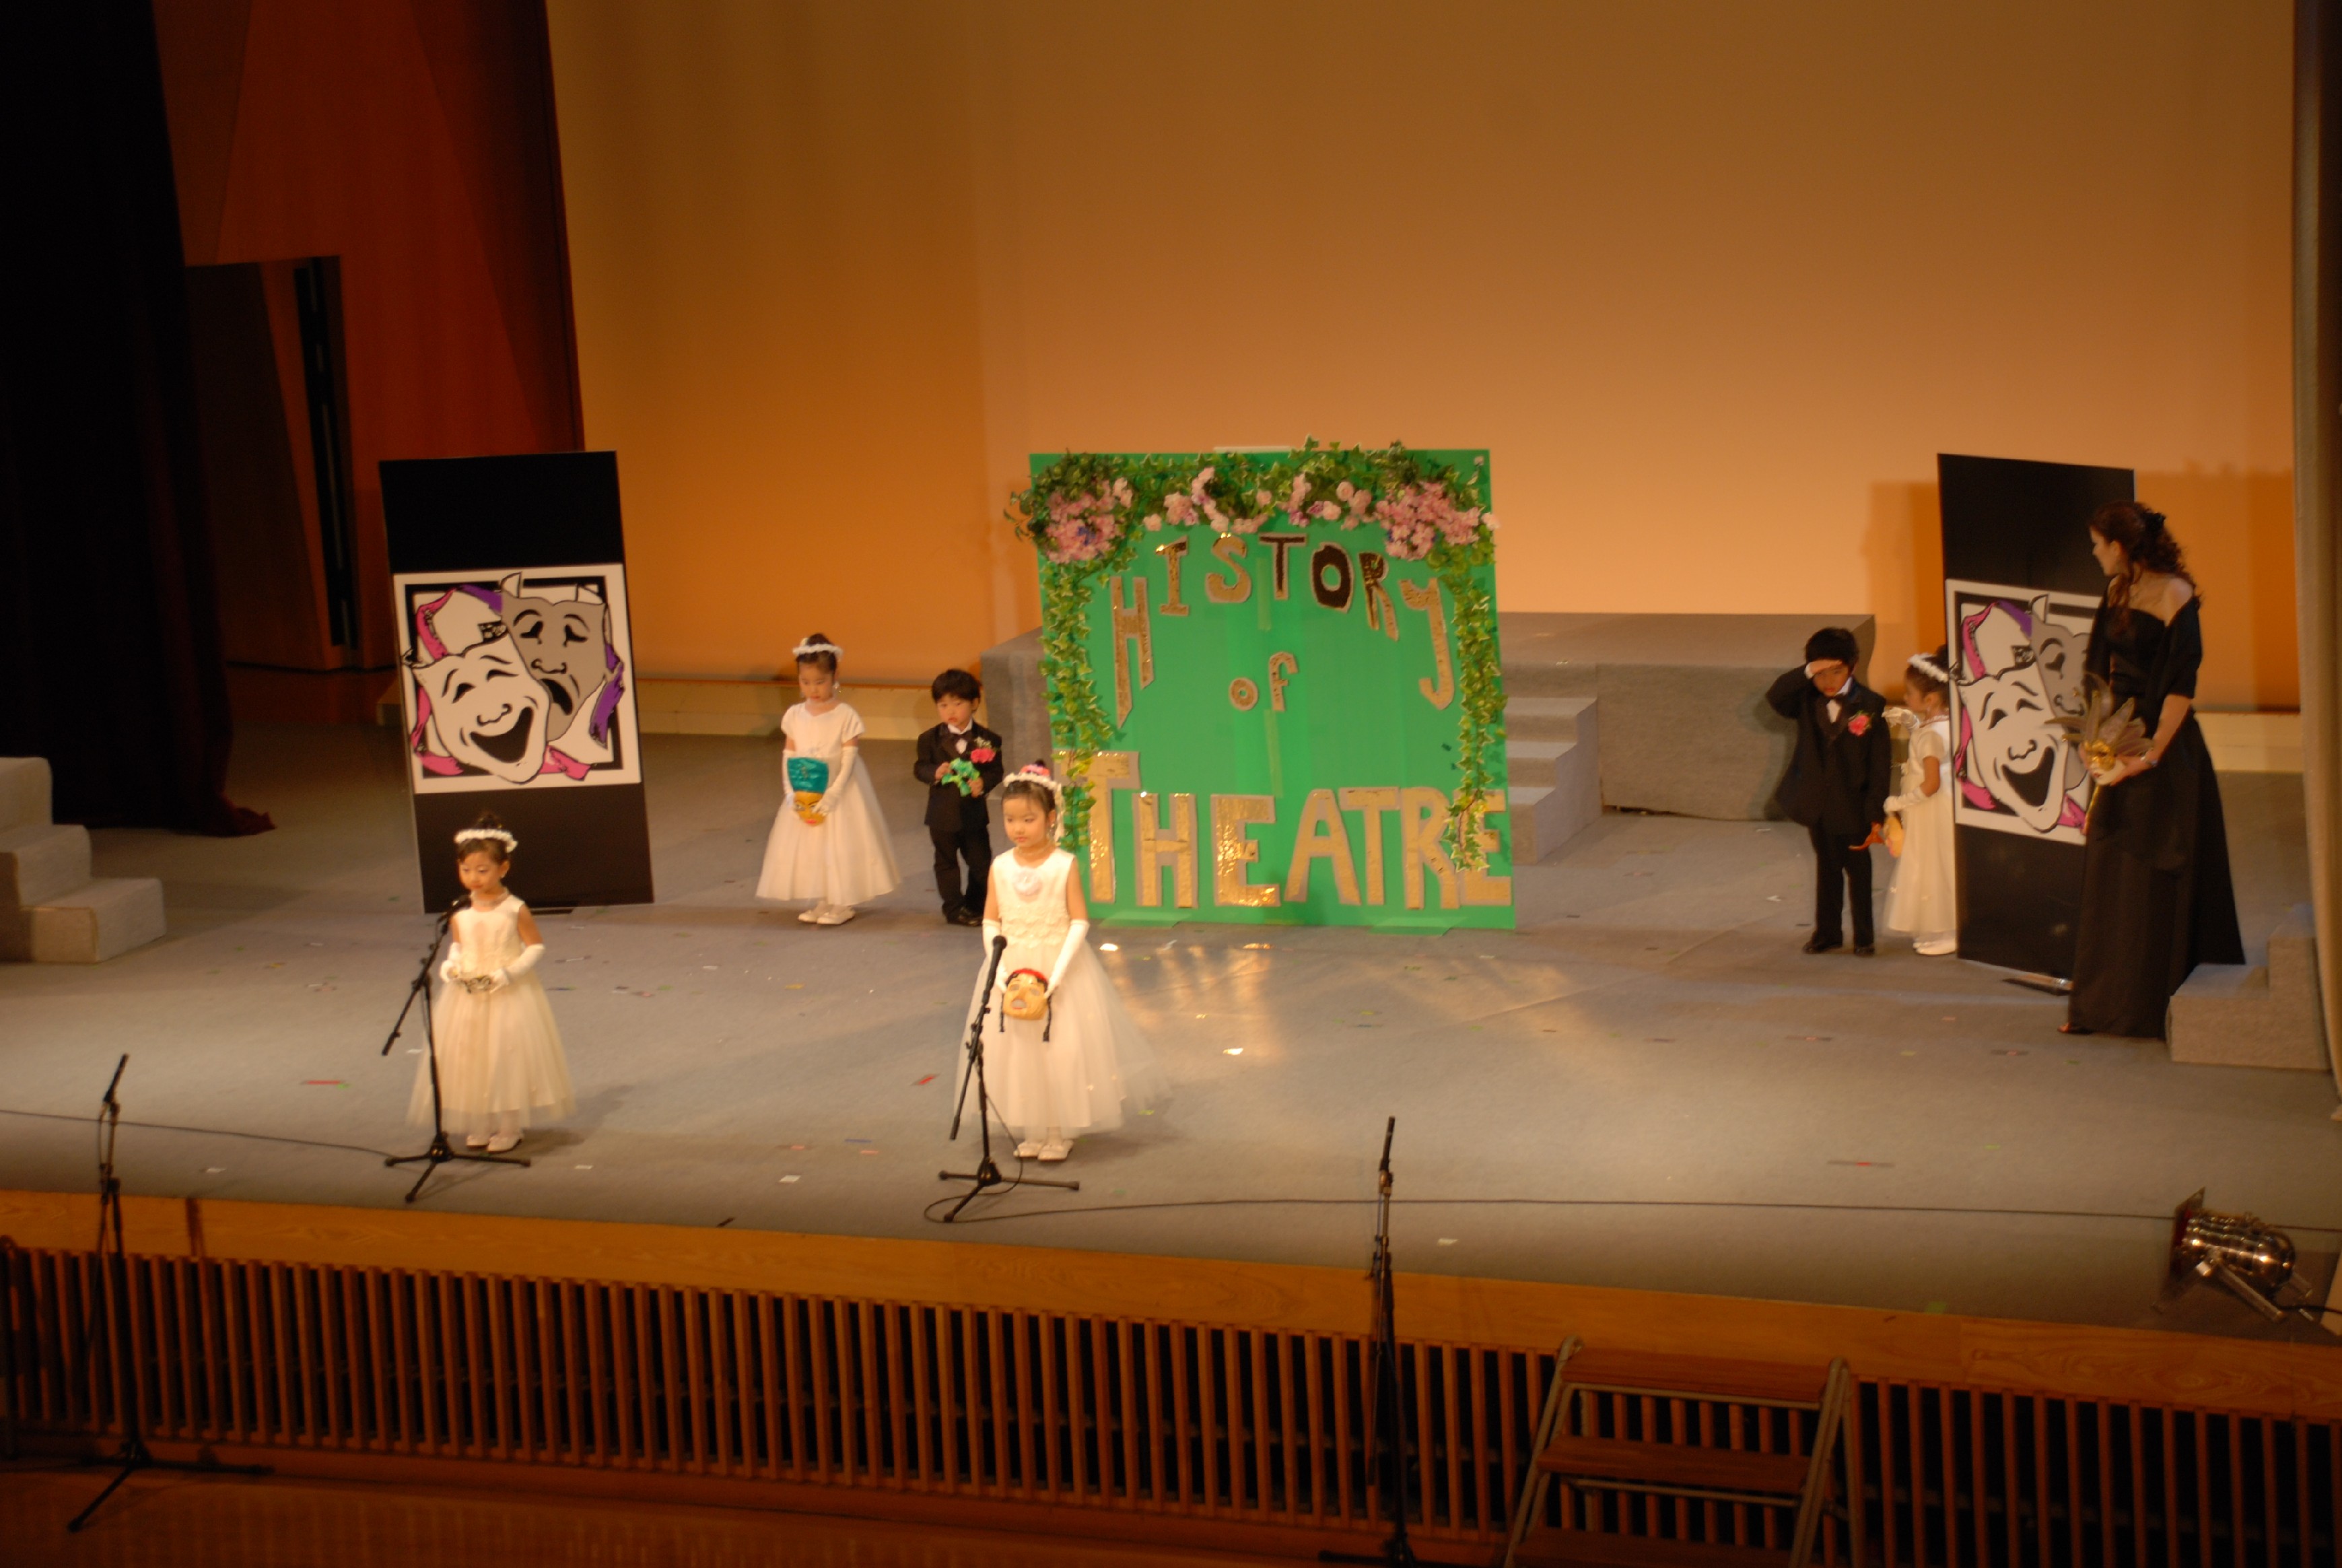 Japanese Students, History of Theatre